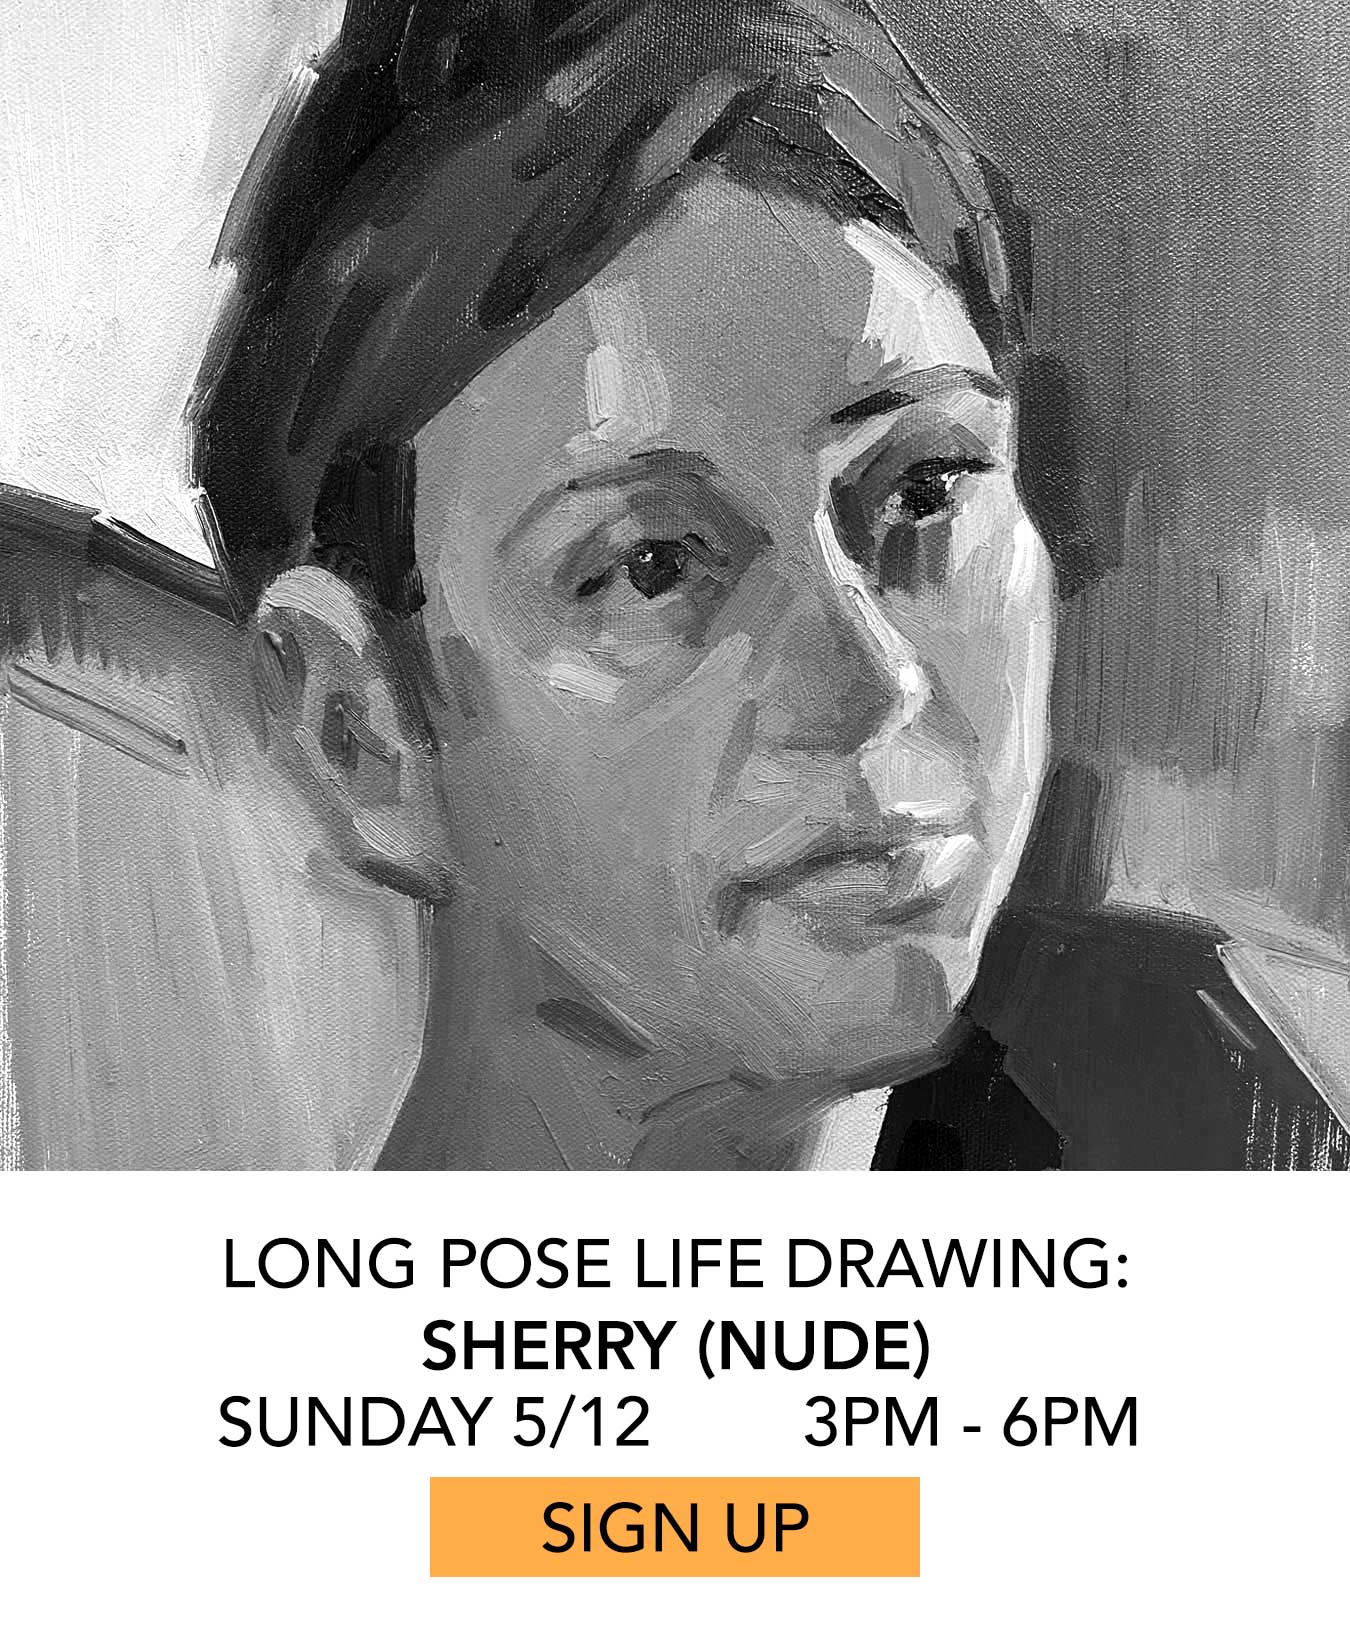 Life Drawing: Sherry (nude). Sunday 5/12 from 3pm to 6pm. Click to Sign Up.